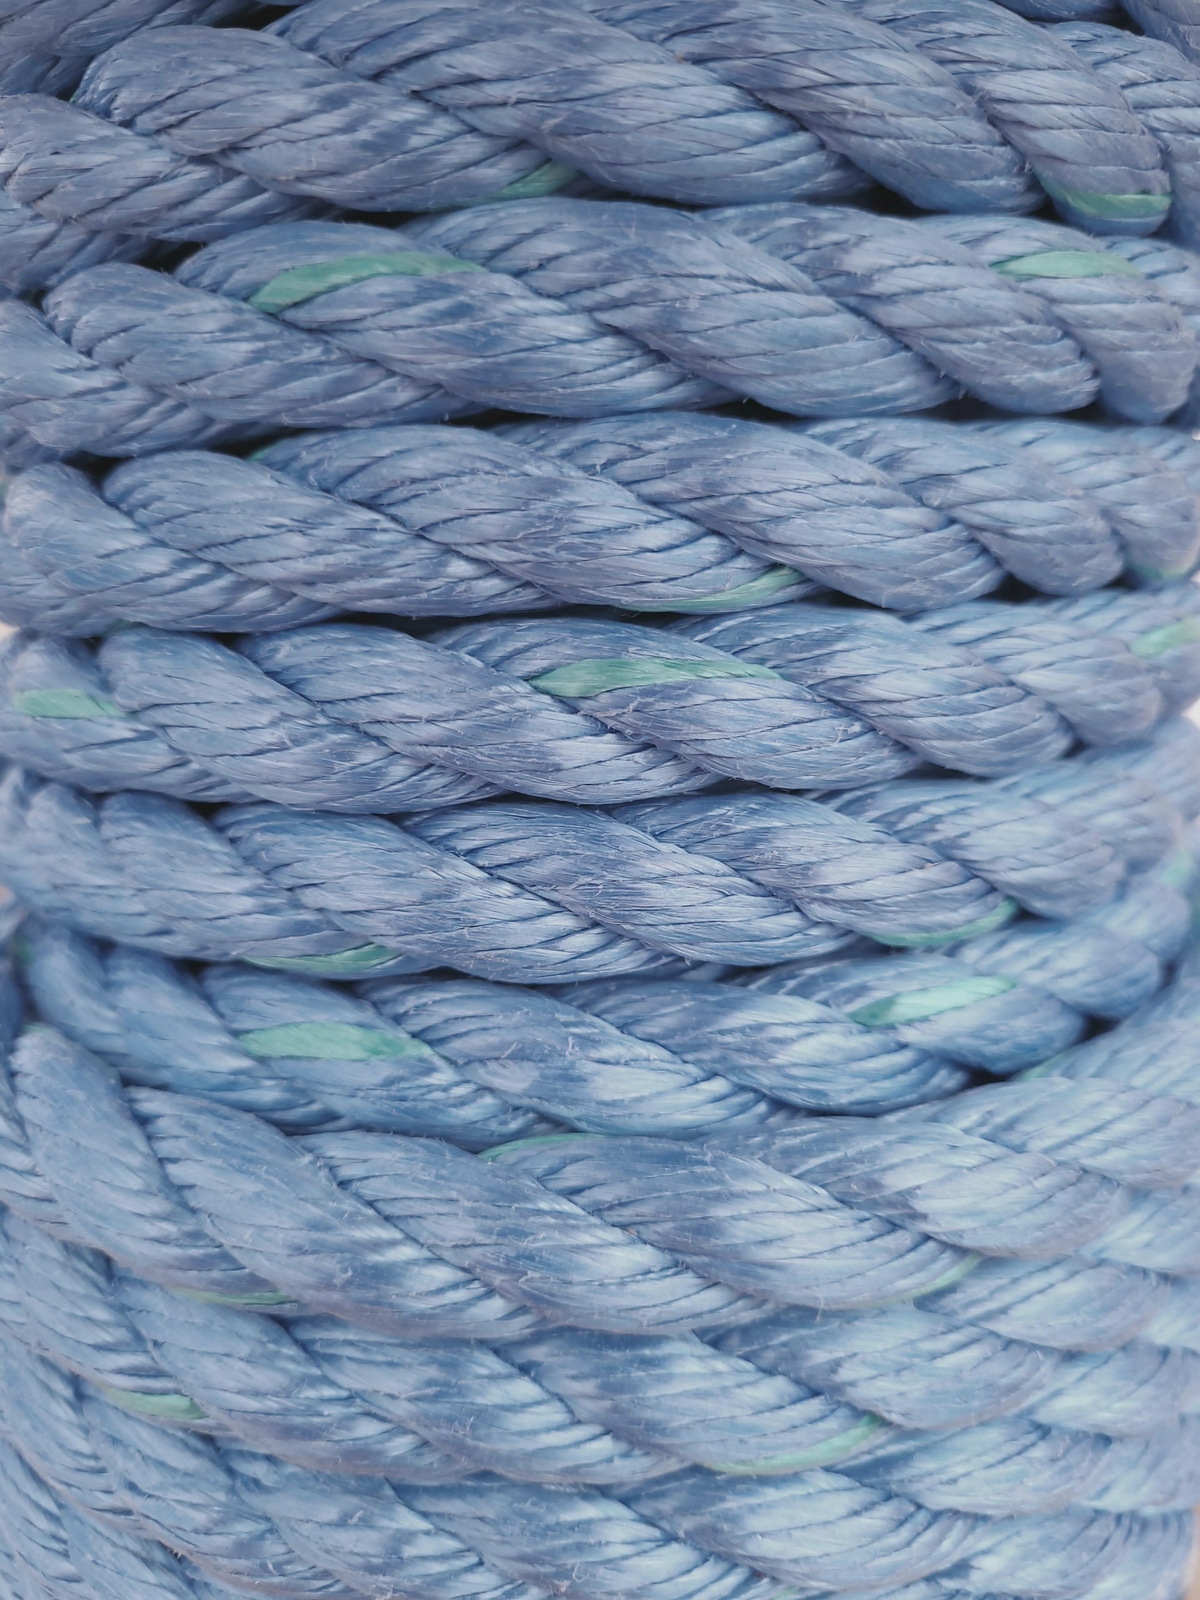 3 Strand X2 High Tenacity Polyolefin ropes - Lowest prices, free